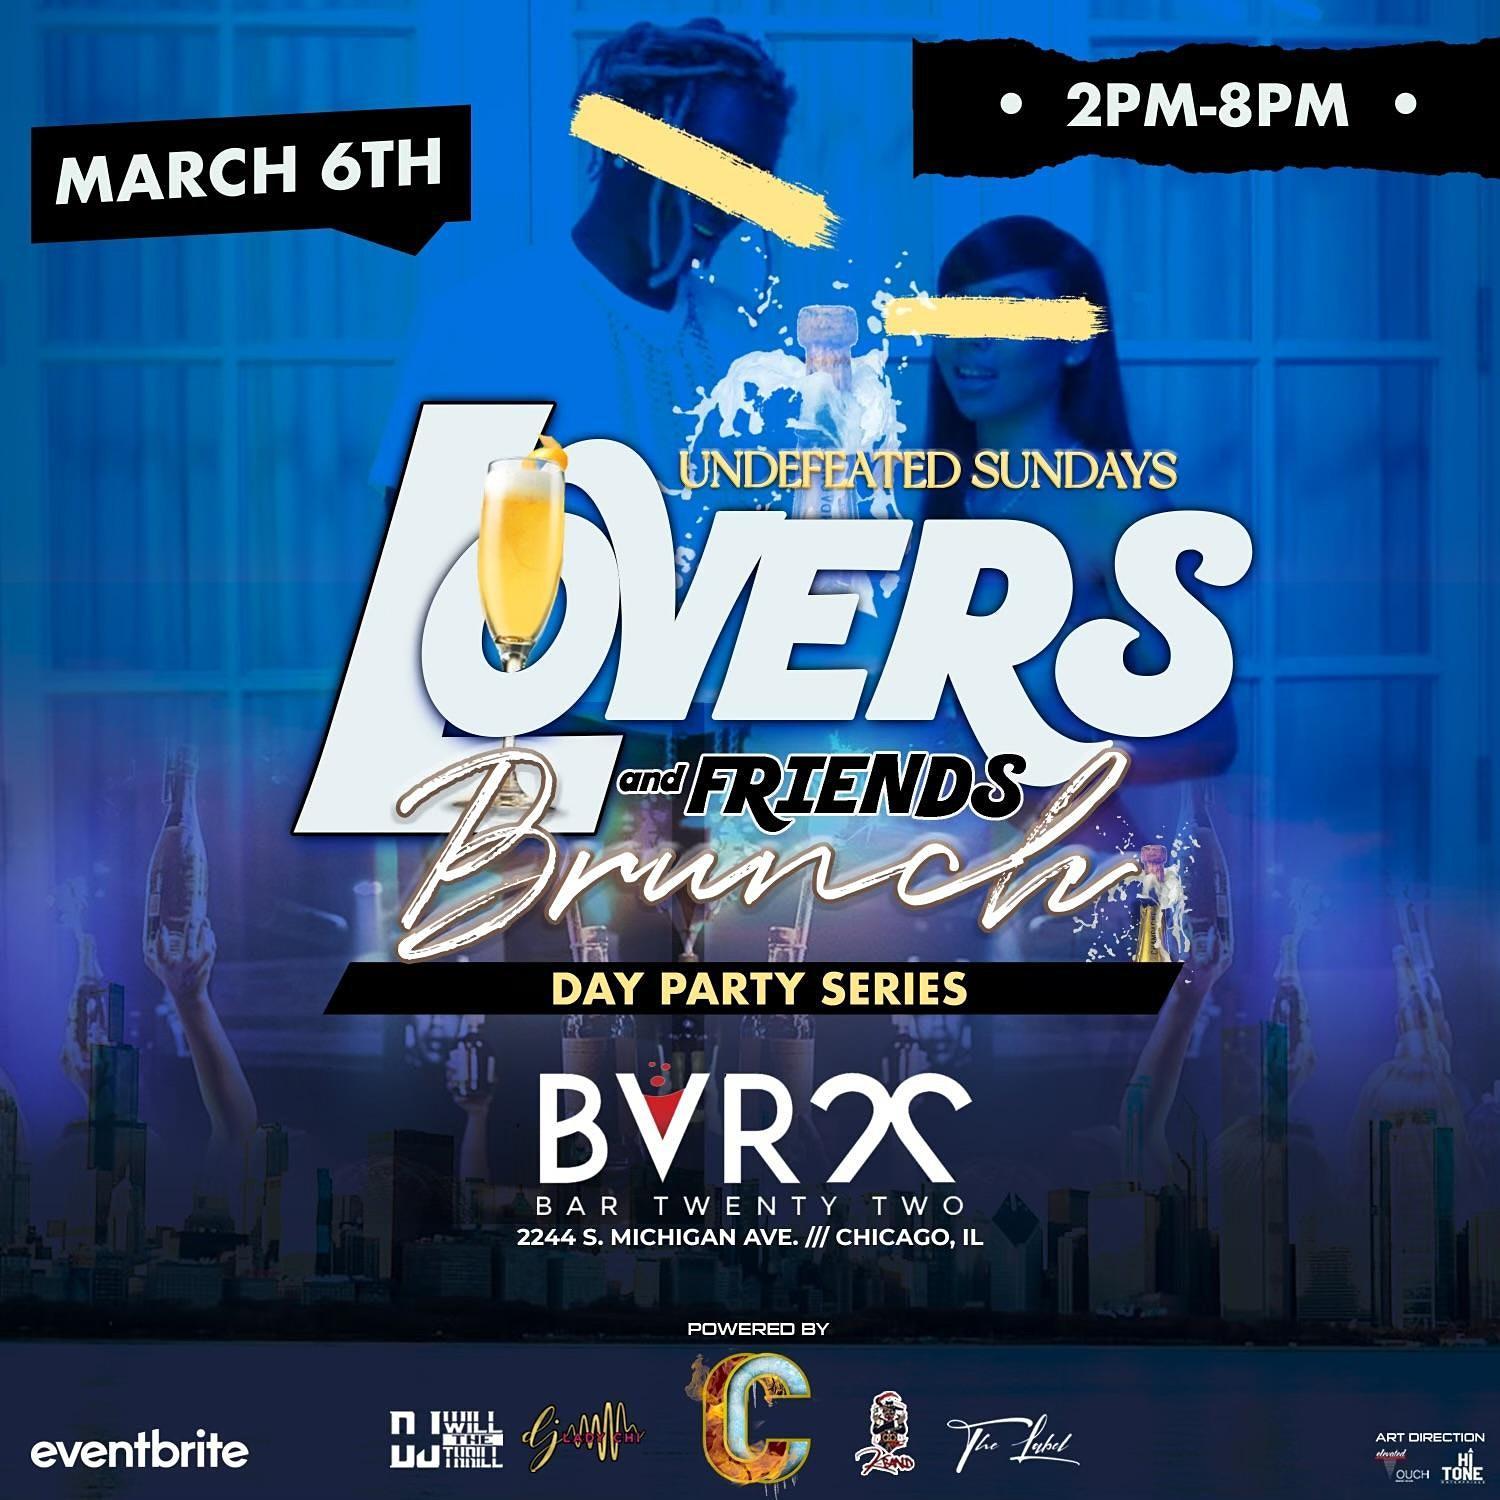 LOVERS & FRIENDS BRUNCH ( DAY PARTY SERIES)
Sun Nov 13, 2:00 PM - Sun Nov 13, 8:00 PM
in 9 days